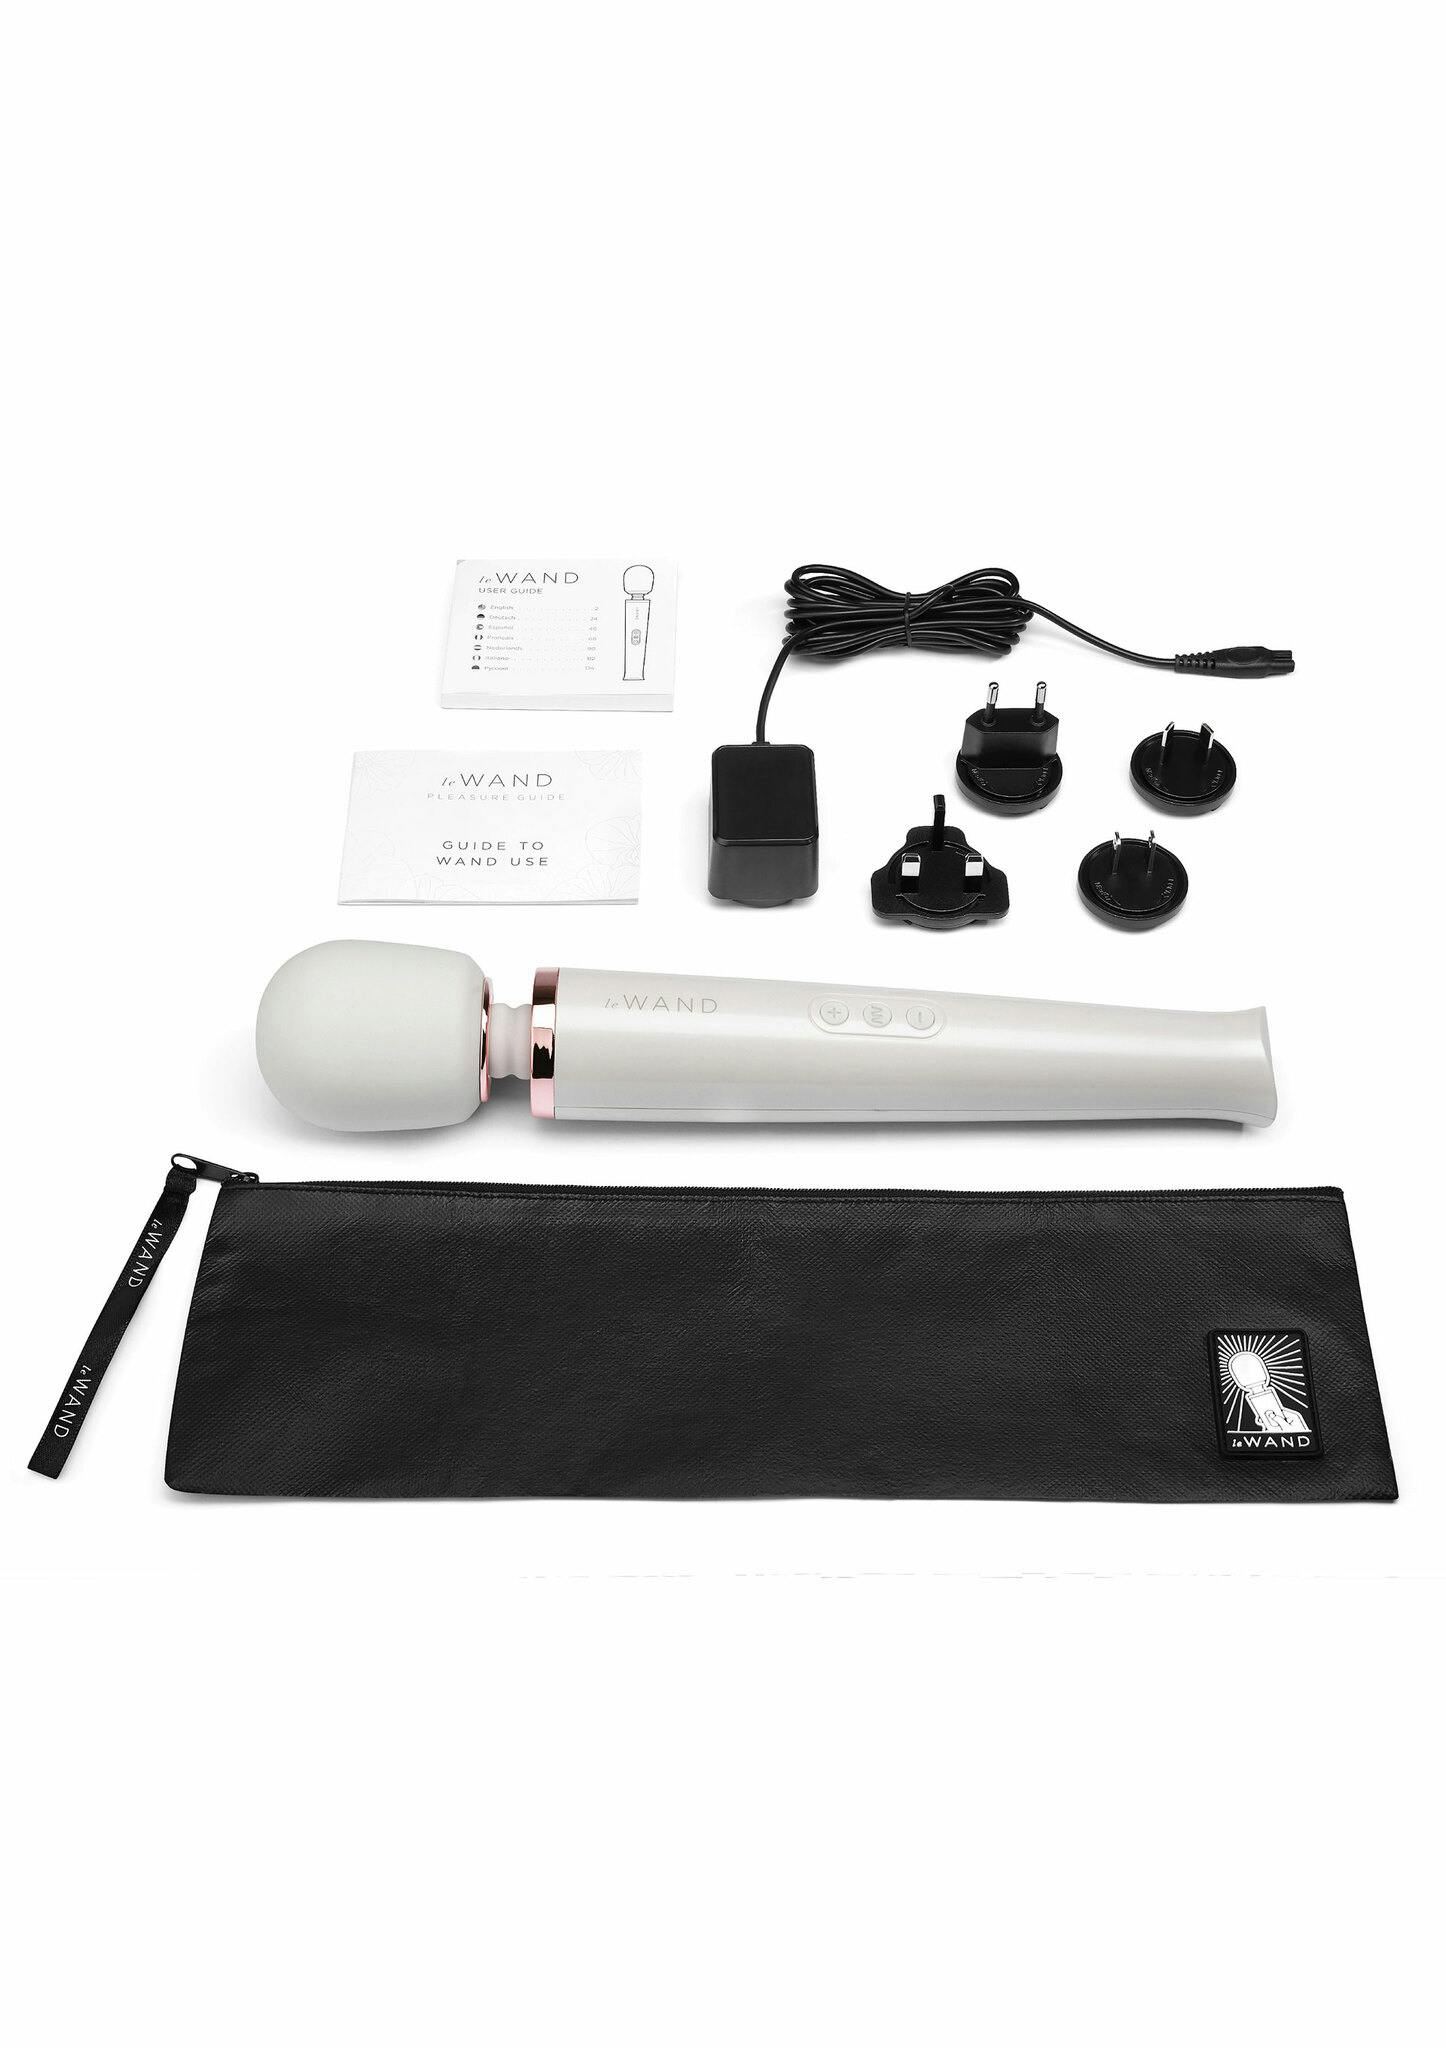 Le Wand Rechargeable Massager, White